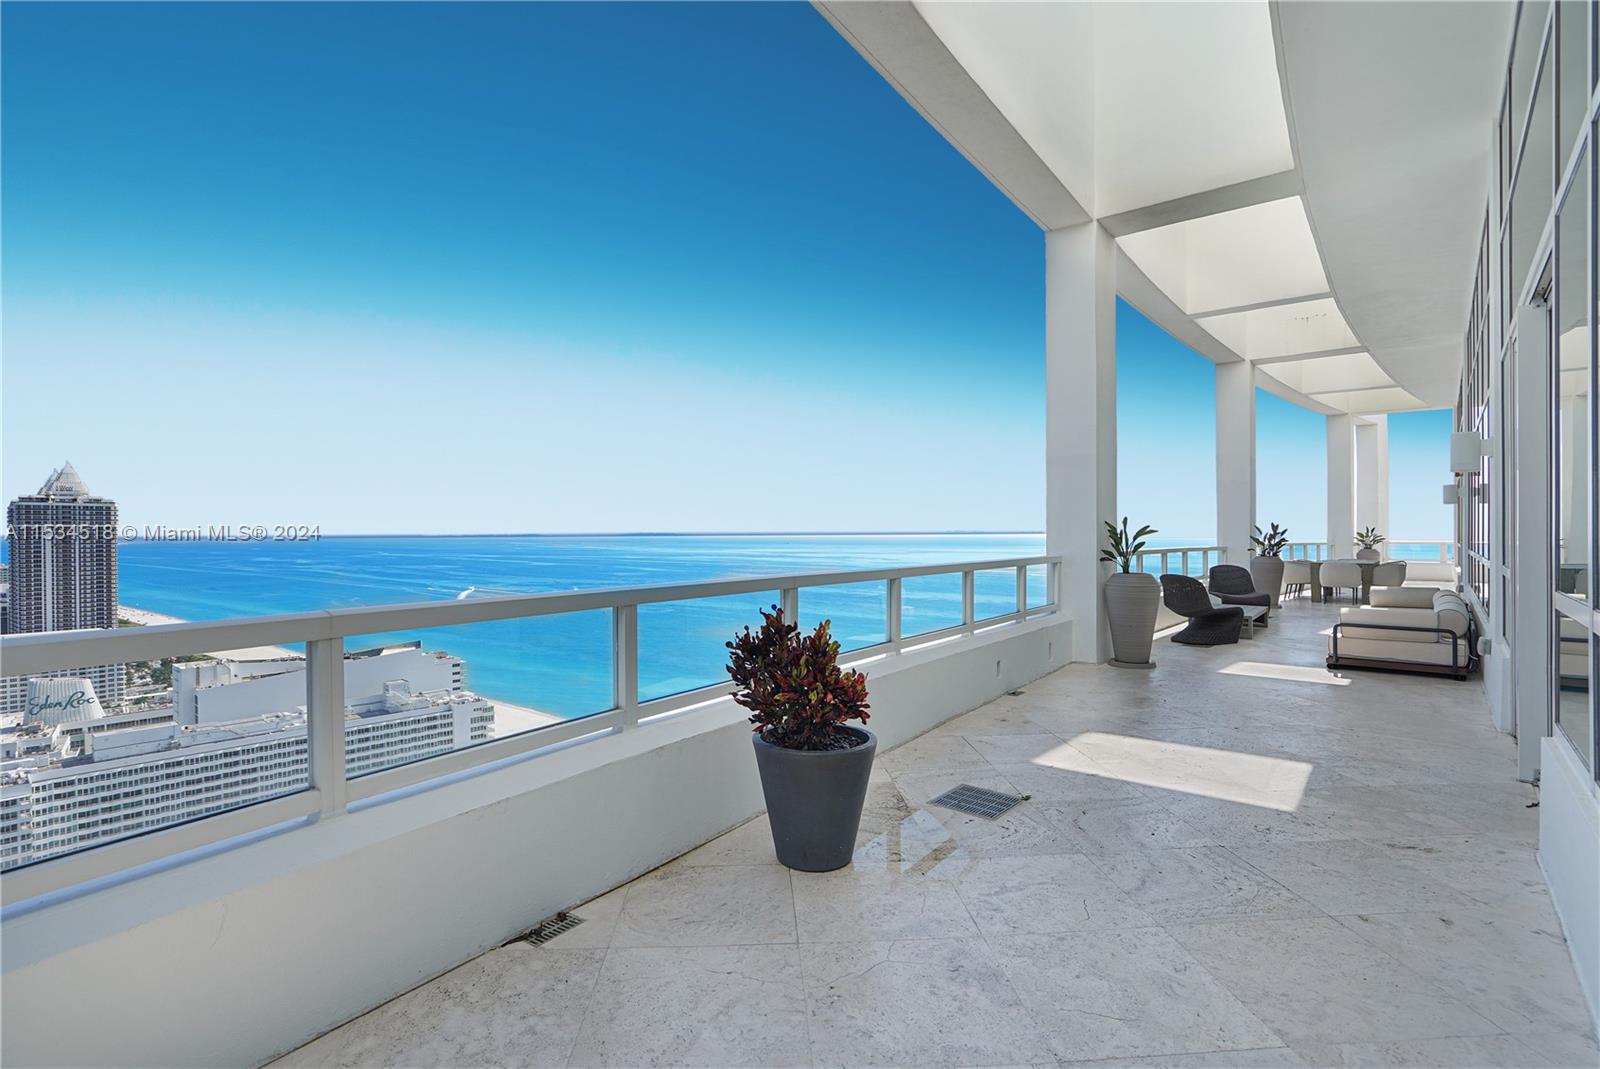 Enjoy the ultimate in resort-style living with this spectacular, turnkey, 5BD/5BA + 2 half bath penthouse encompassing the entire north side of the 37th floor at the iconic Fontainebleau II. Indulge in spectacular views of the ocean, bay & Miami skyline from the huge 3300 SF terrace with private pool & shower. The great room boasts volume ceilings & soaring windows, inviting natural light and beauty indoors. Keep your yacht at the Marina across the street on the Intracoastal. The Fontainebleau Resort offers amenities on 22 oceanfront acres including award-winning restaurants, LIV night club, Lapis spa & fitness center. Short term rentals available.